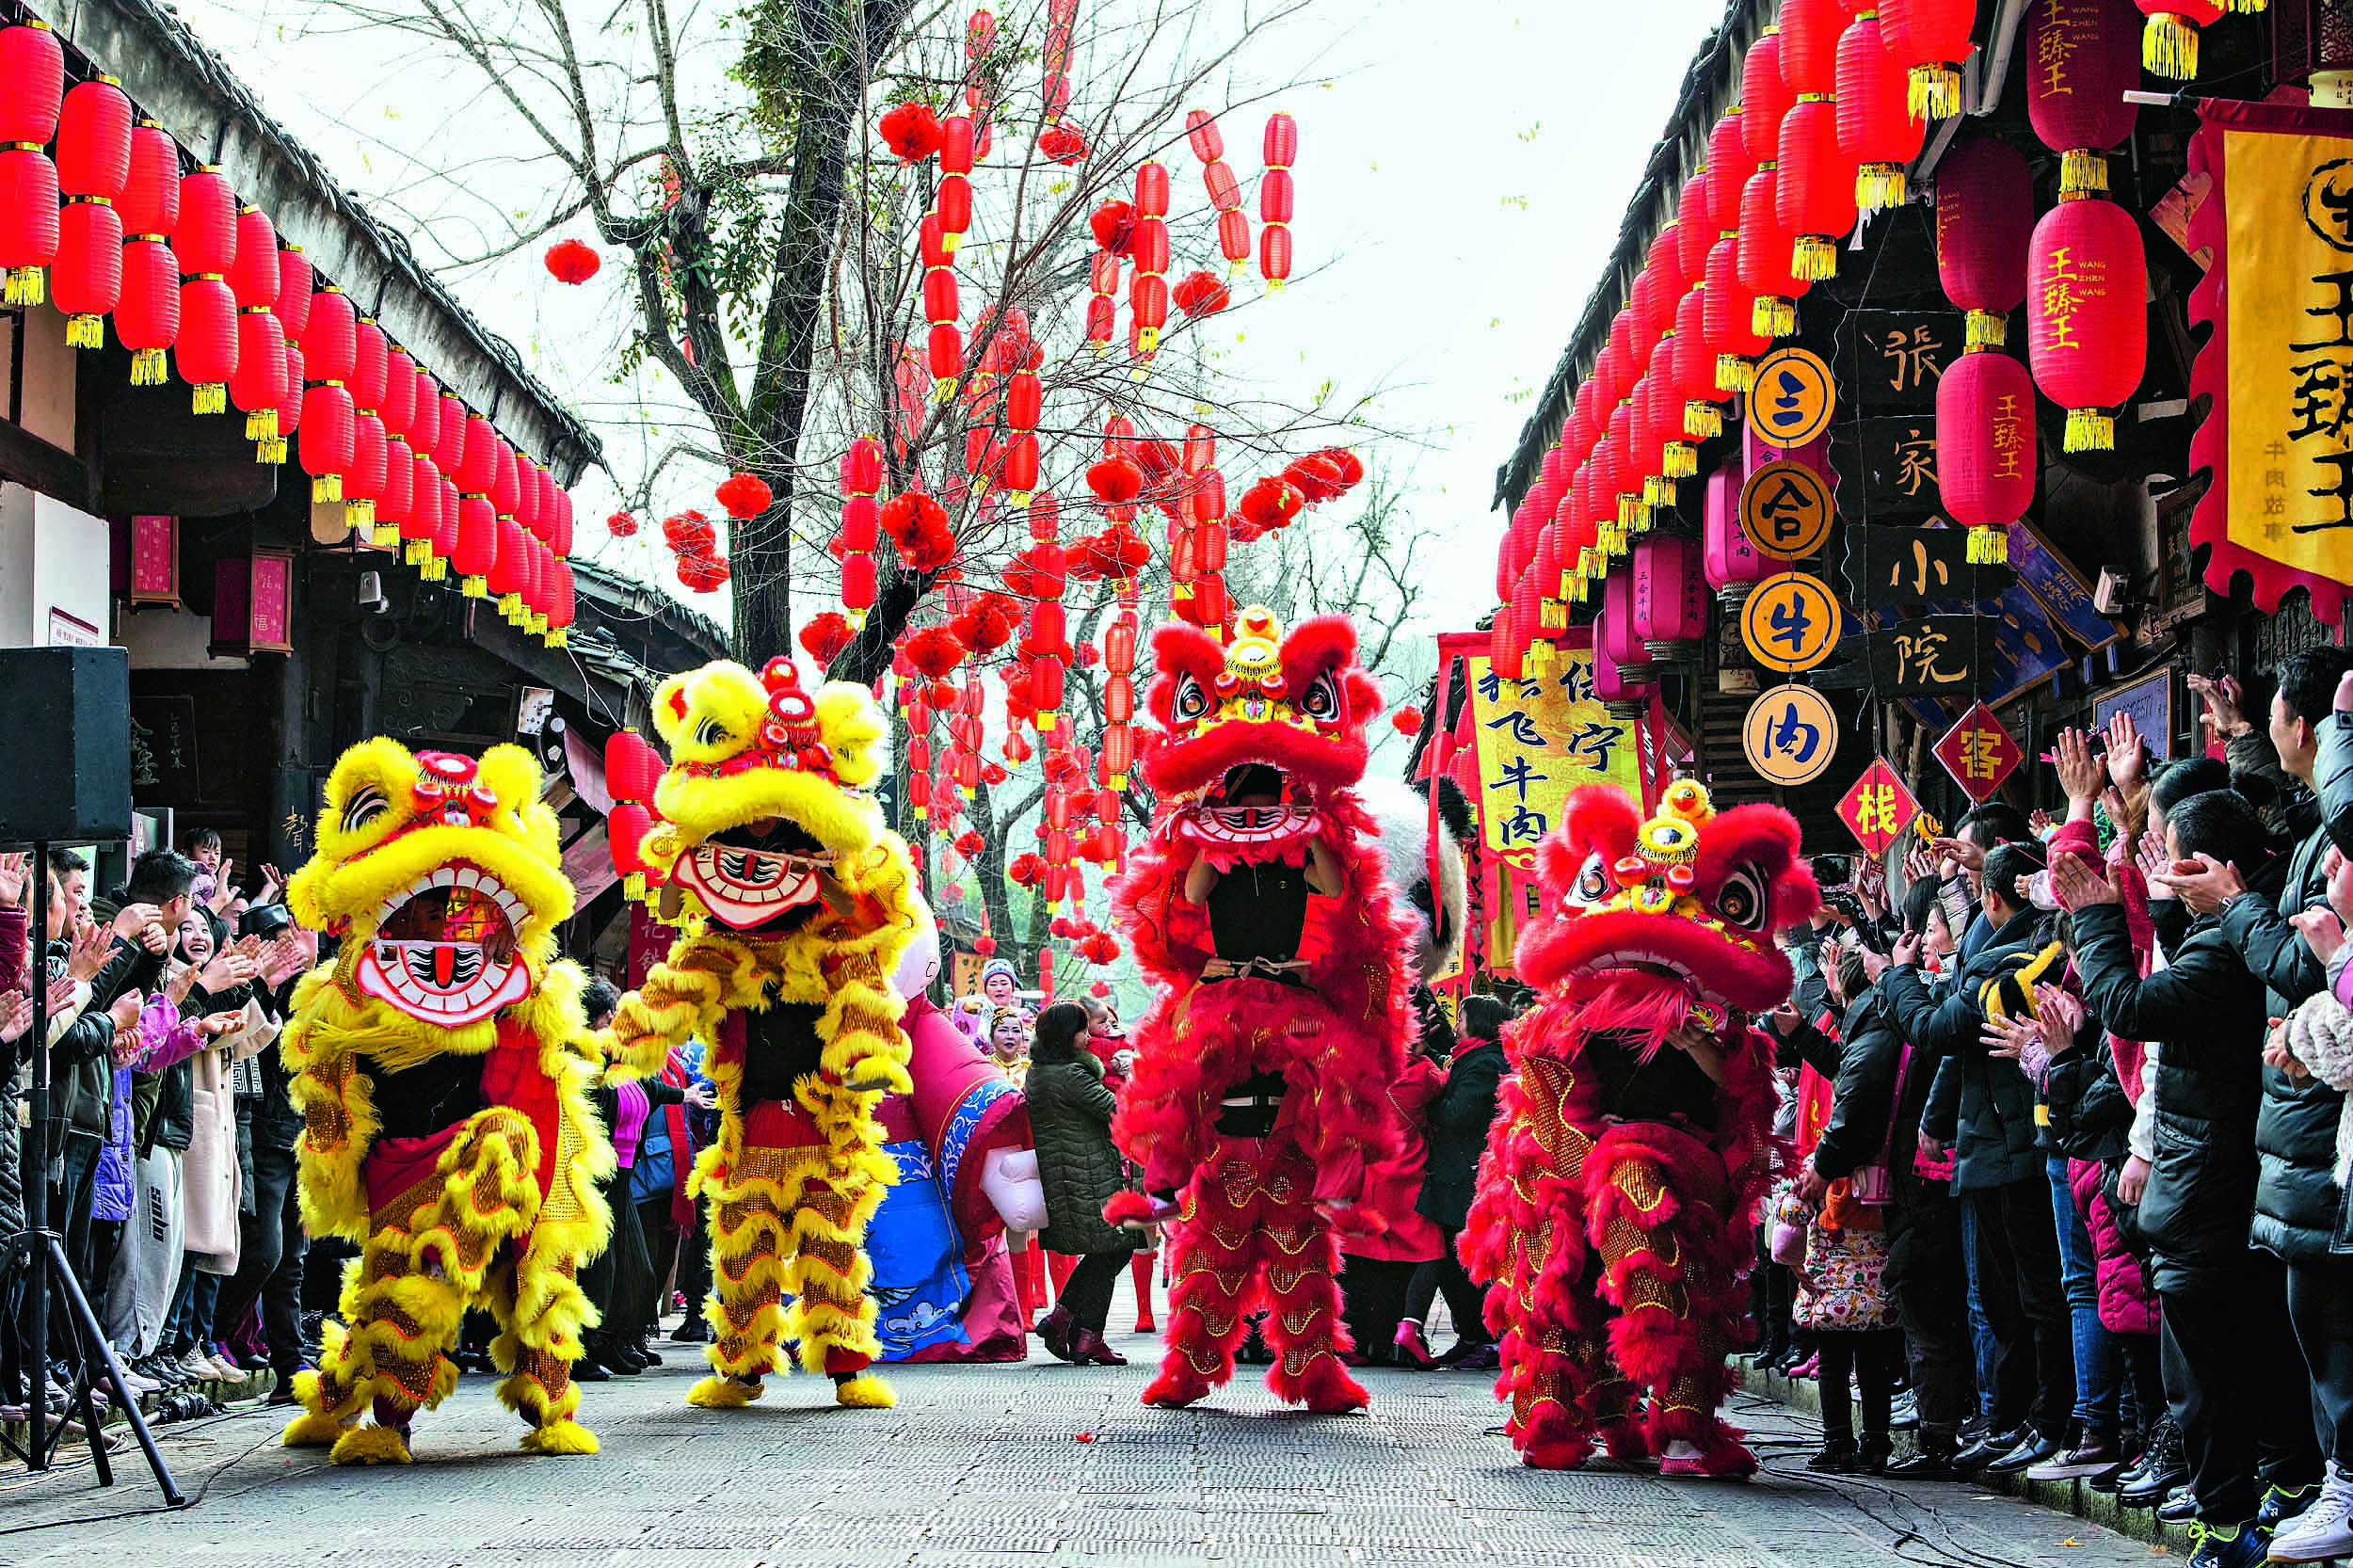 Cultural confidence glows via new Chinese